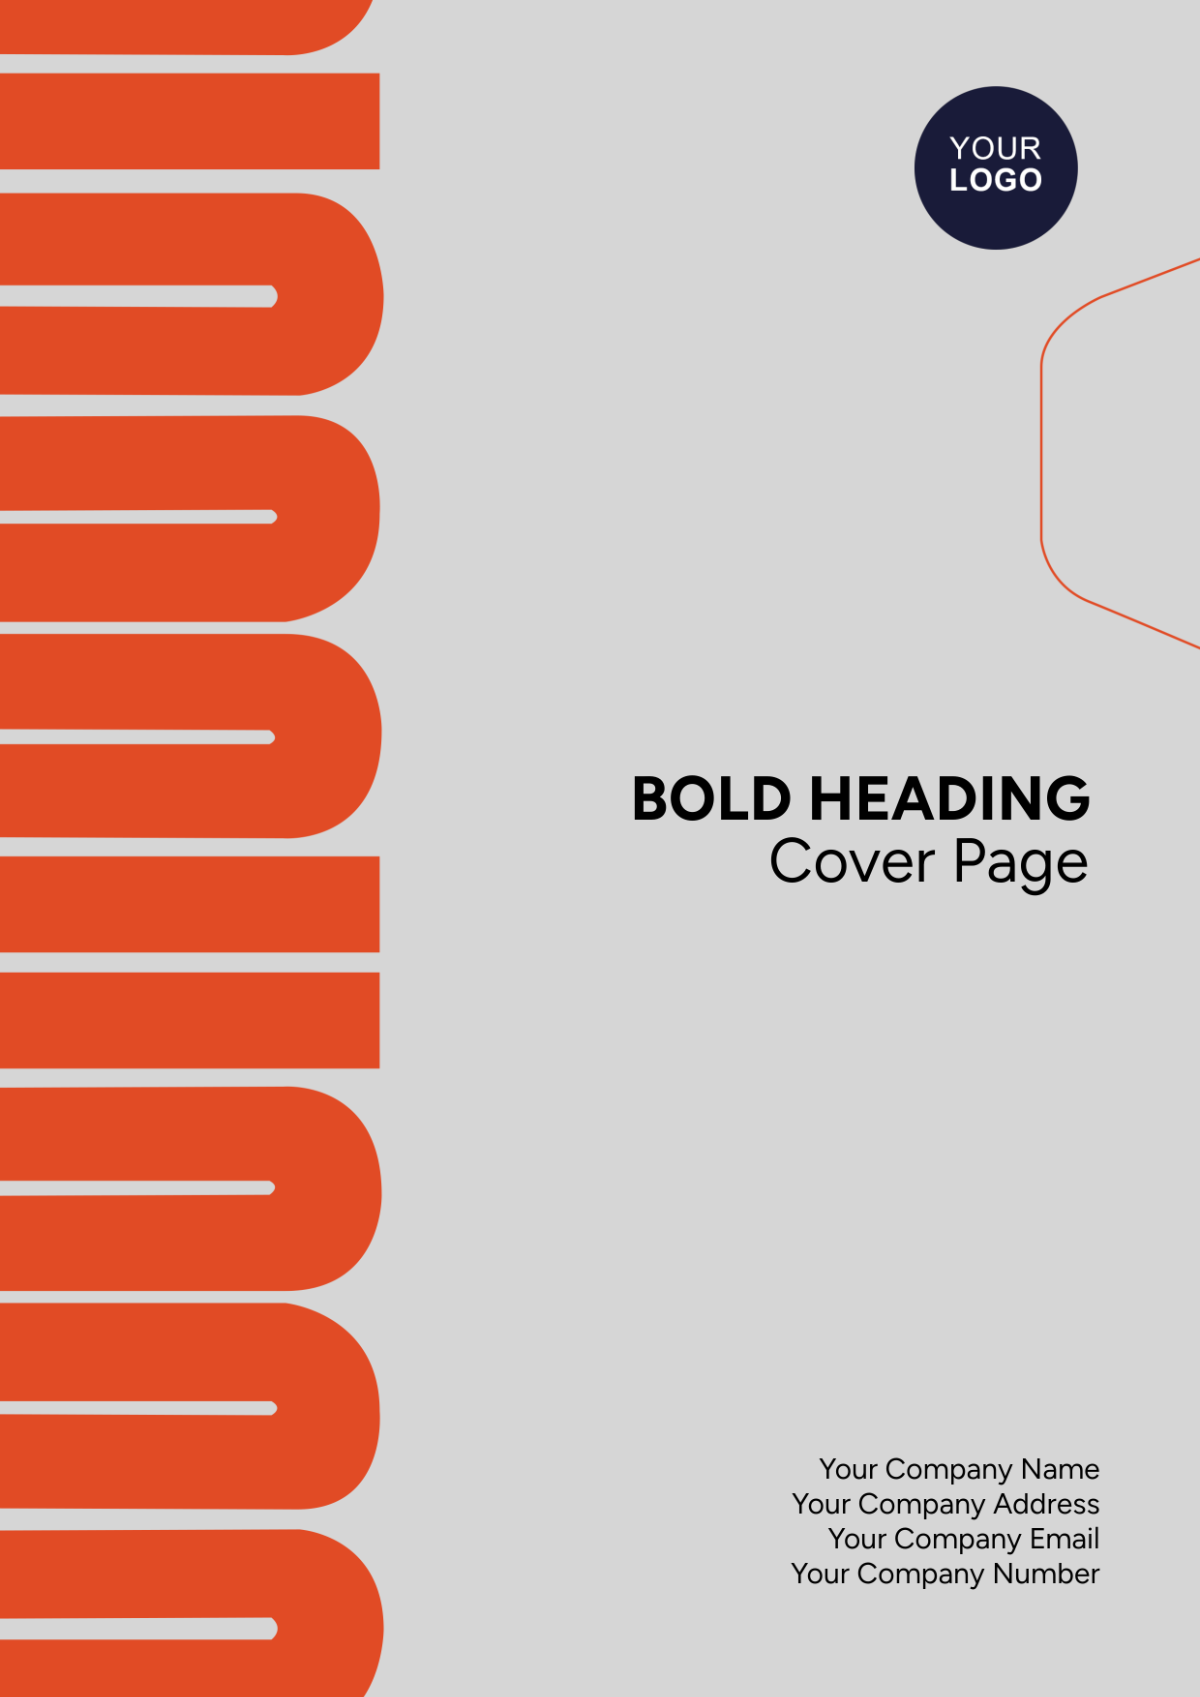 Bold Heading Cover Page